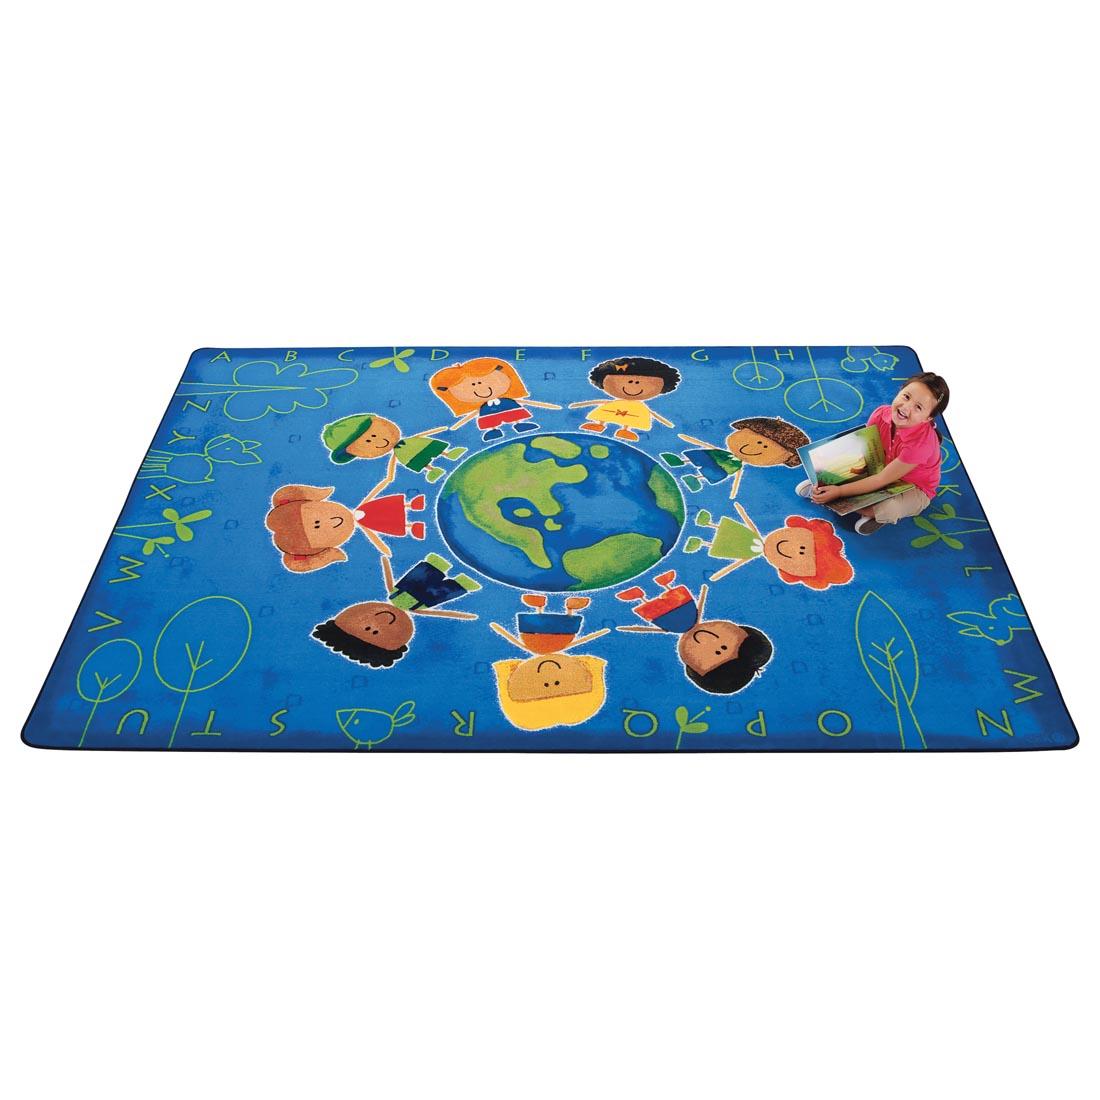 Child with a book sitting on the Give the Planet a Hug Rug by Carpets For Kids